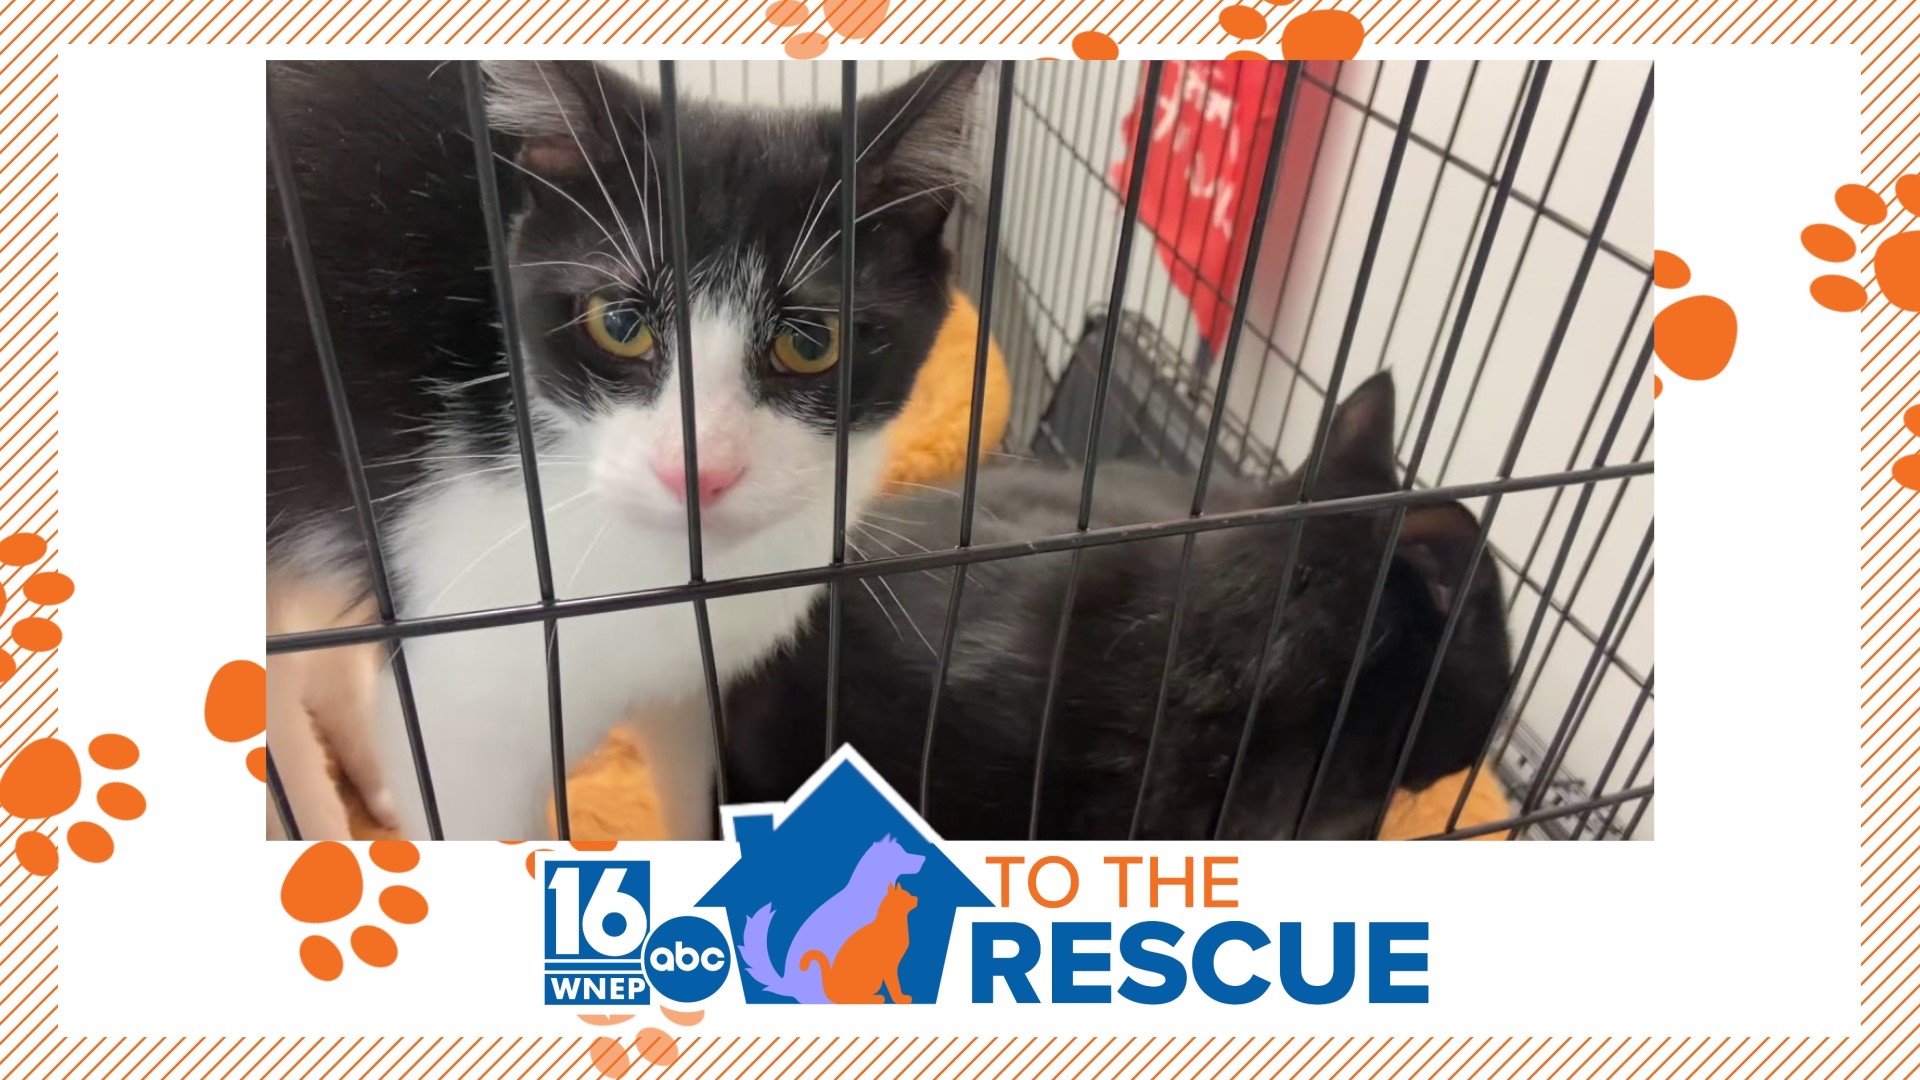 In this week's 16 To The Rescue, we meet two cats who have become bonded after everything they've been through.